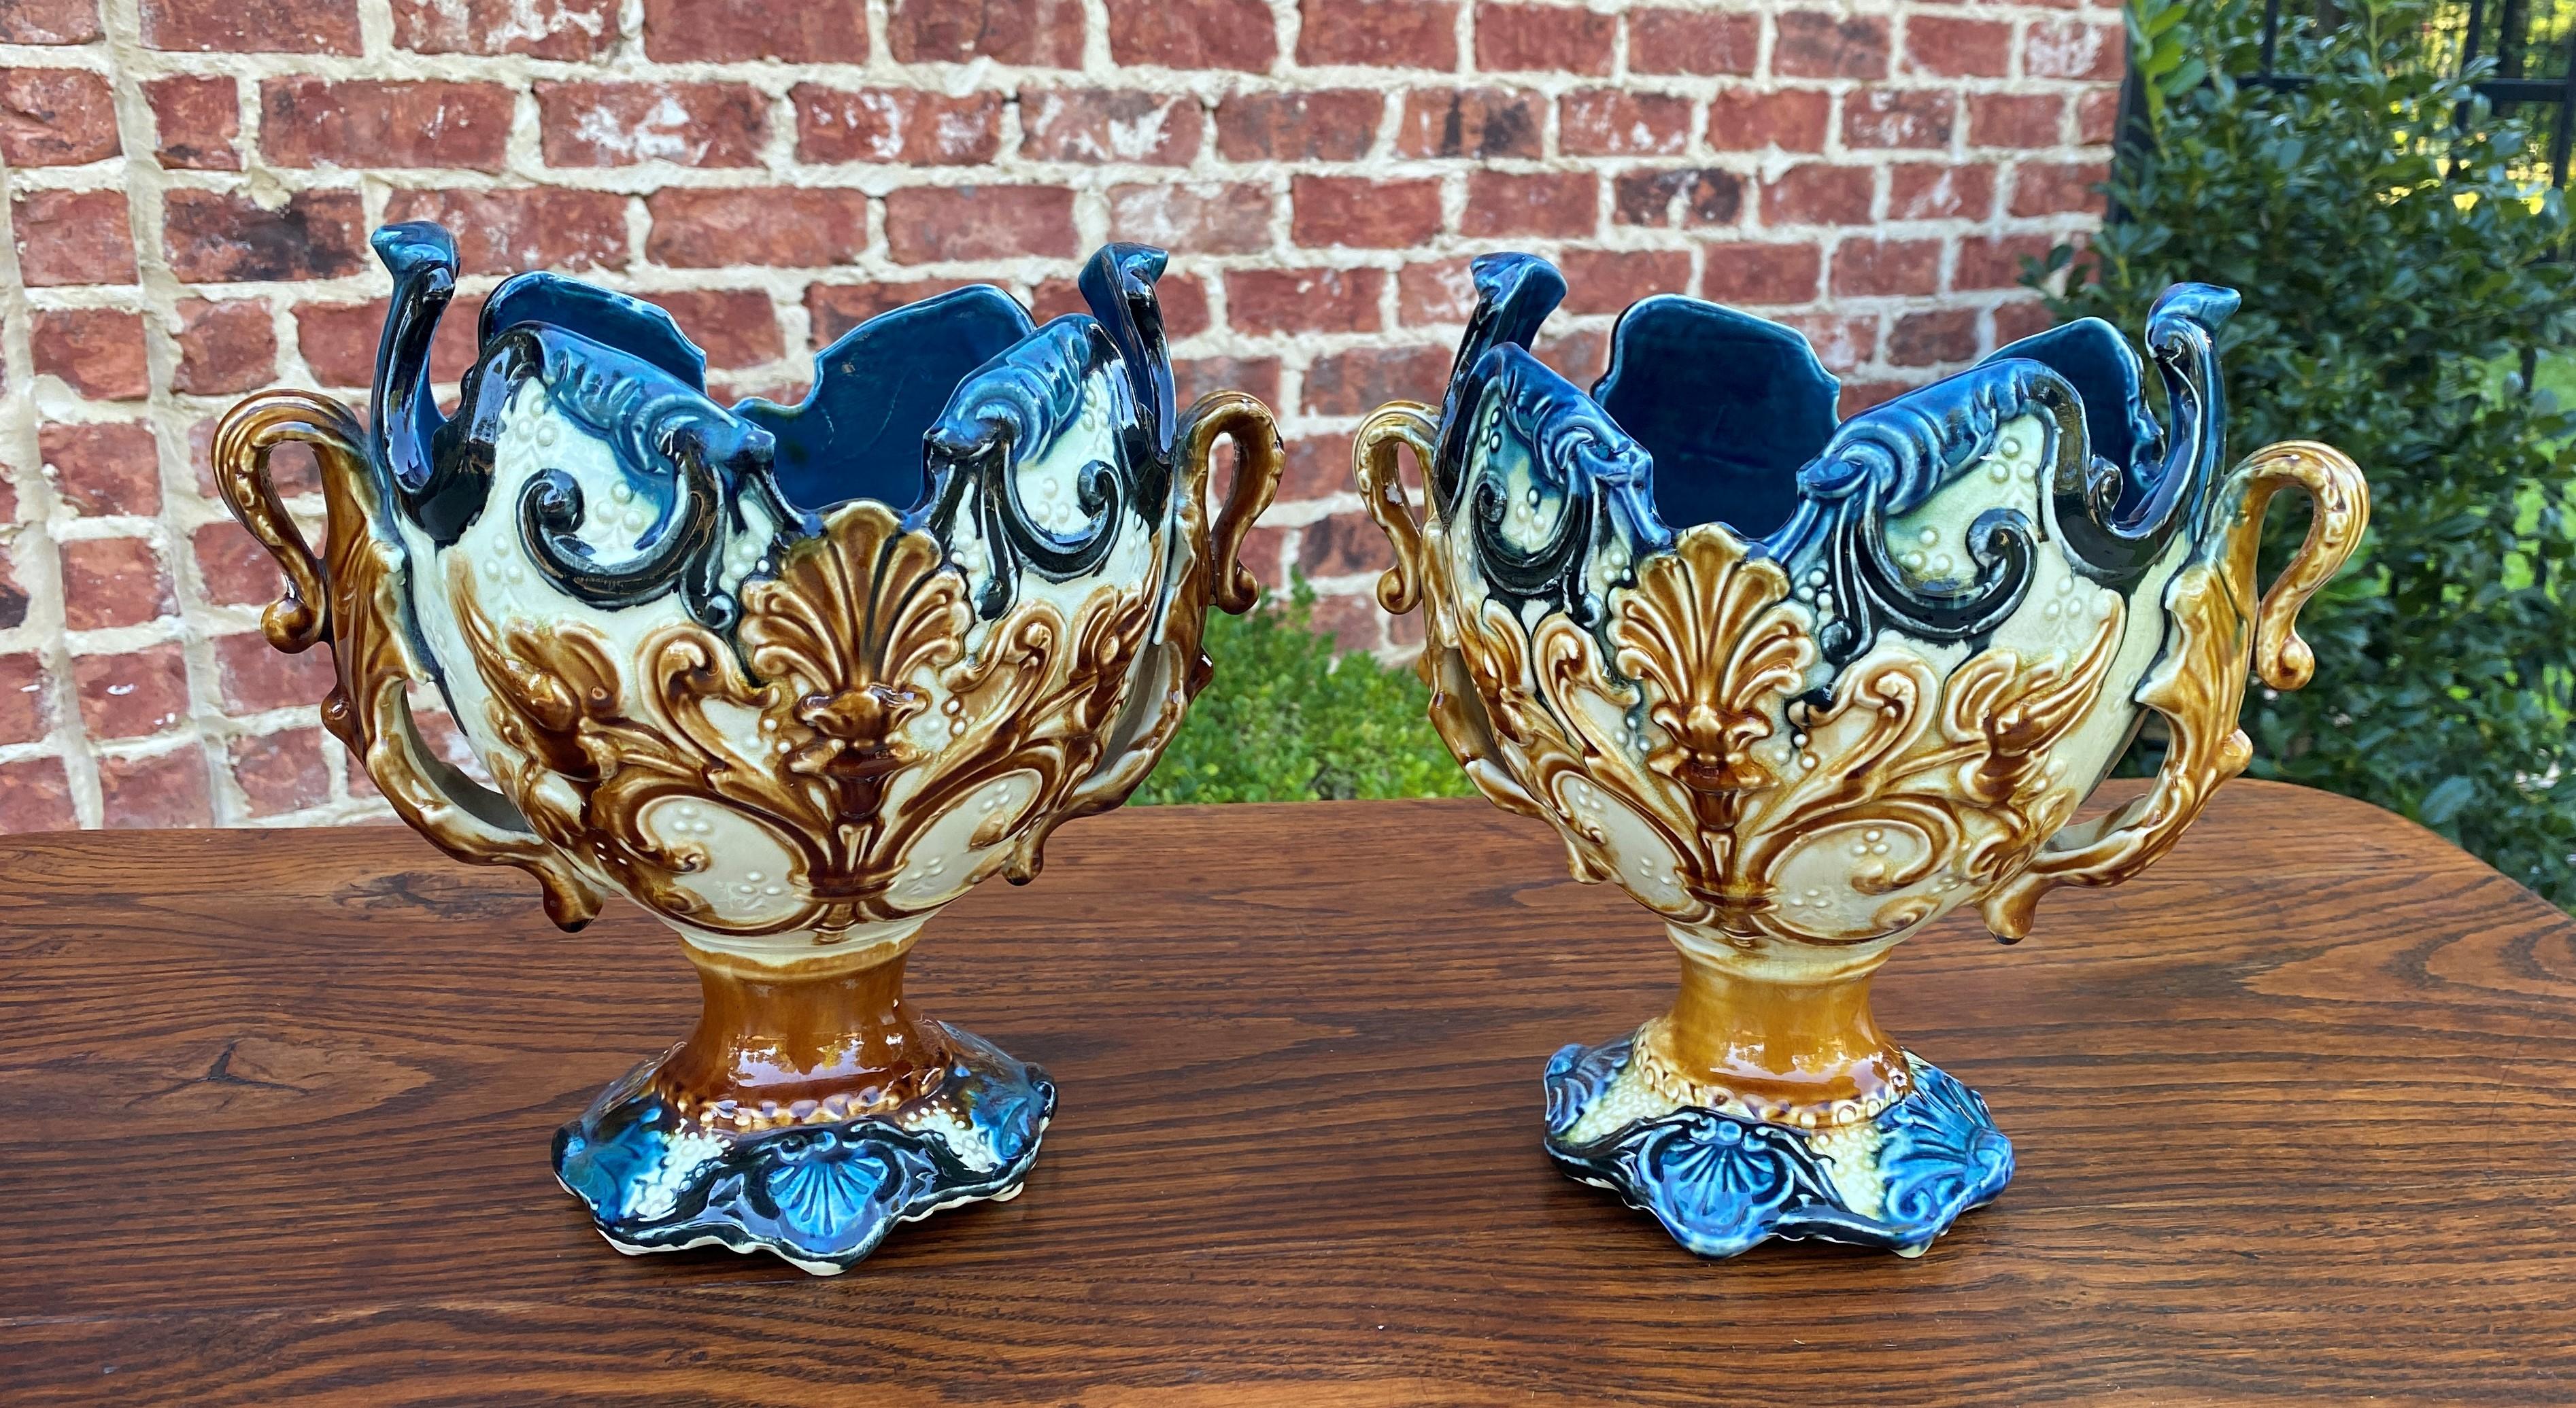 Gorgeous Pair Antique French Majolica Cache Pots, Planters, Jardinieres, Flower Pots or Vases~~c. 1900

Authentic French majolica planters or cache pots~~vibrant colors of teal, brown, gold, green and many more~~a must have for